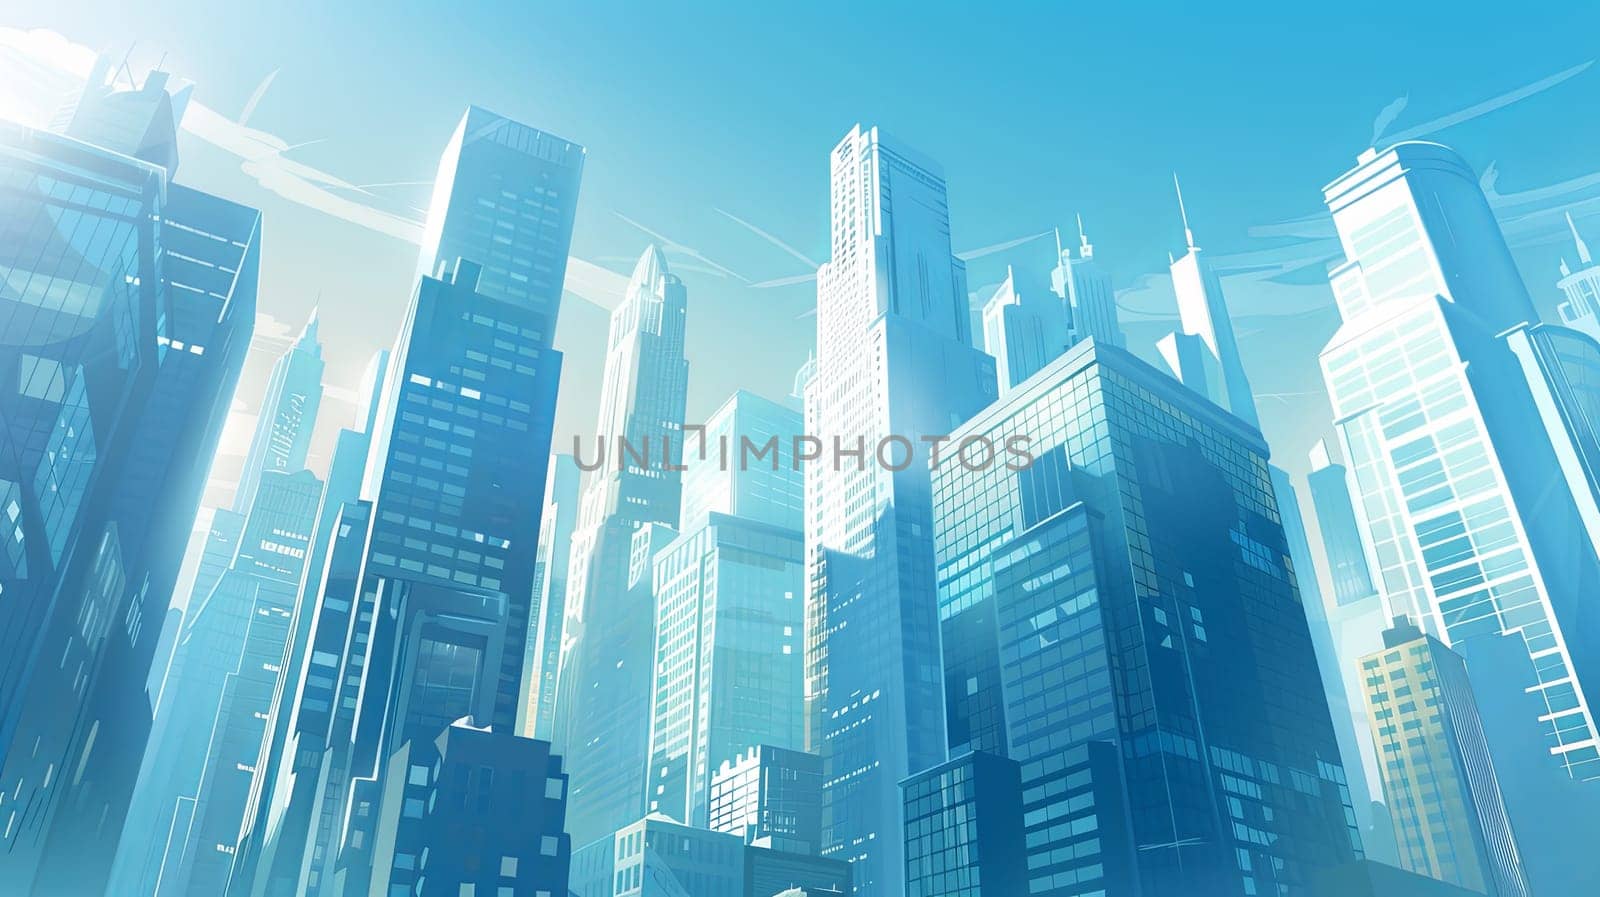 A view of a sprawling futuristic city with towering skyscrapers under a clear blue sky.